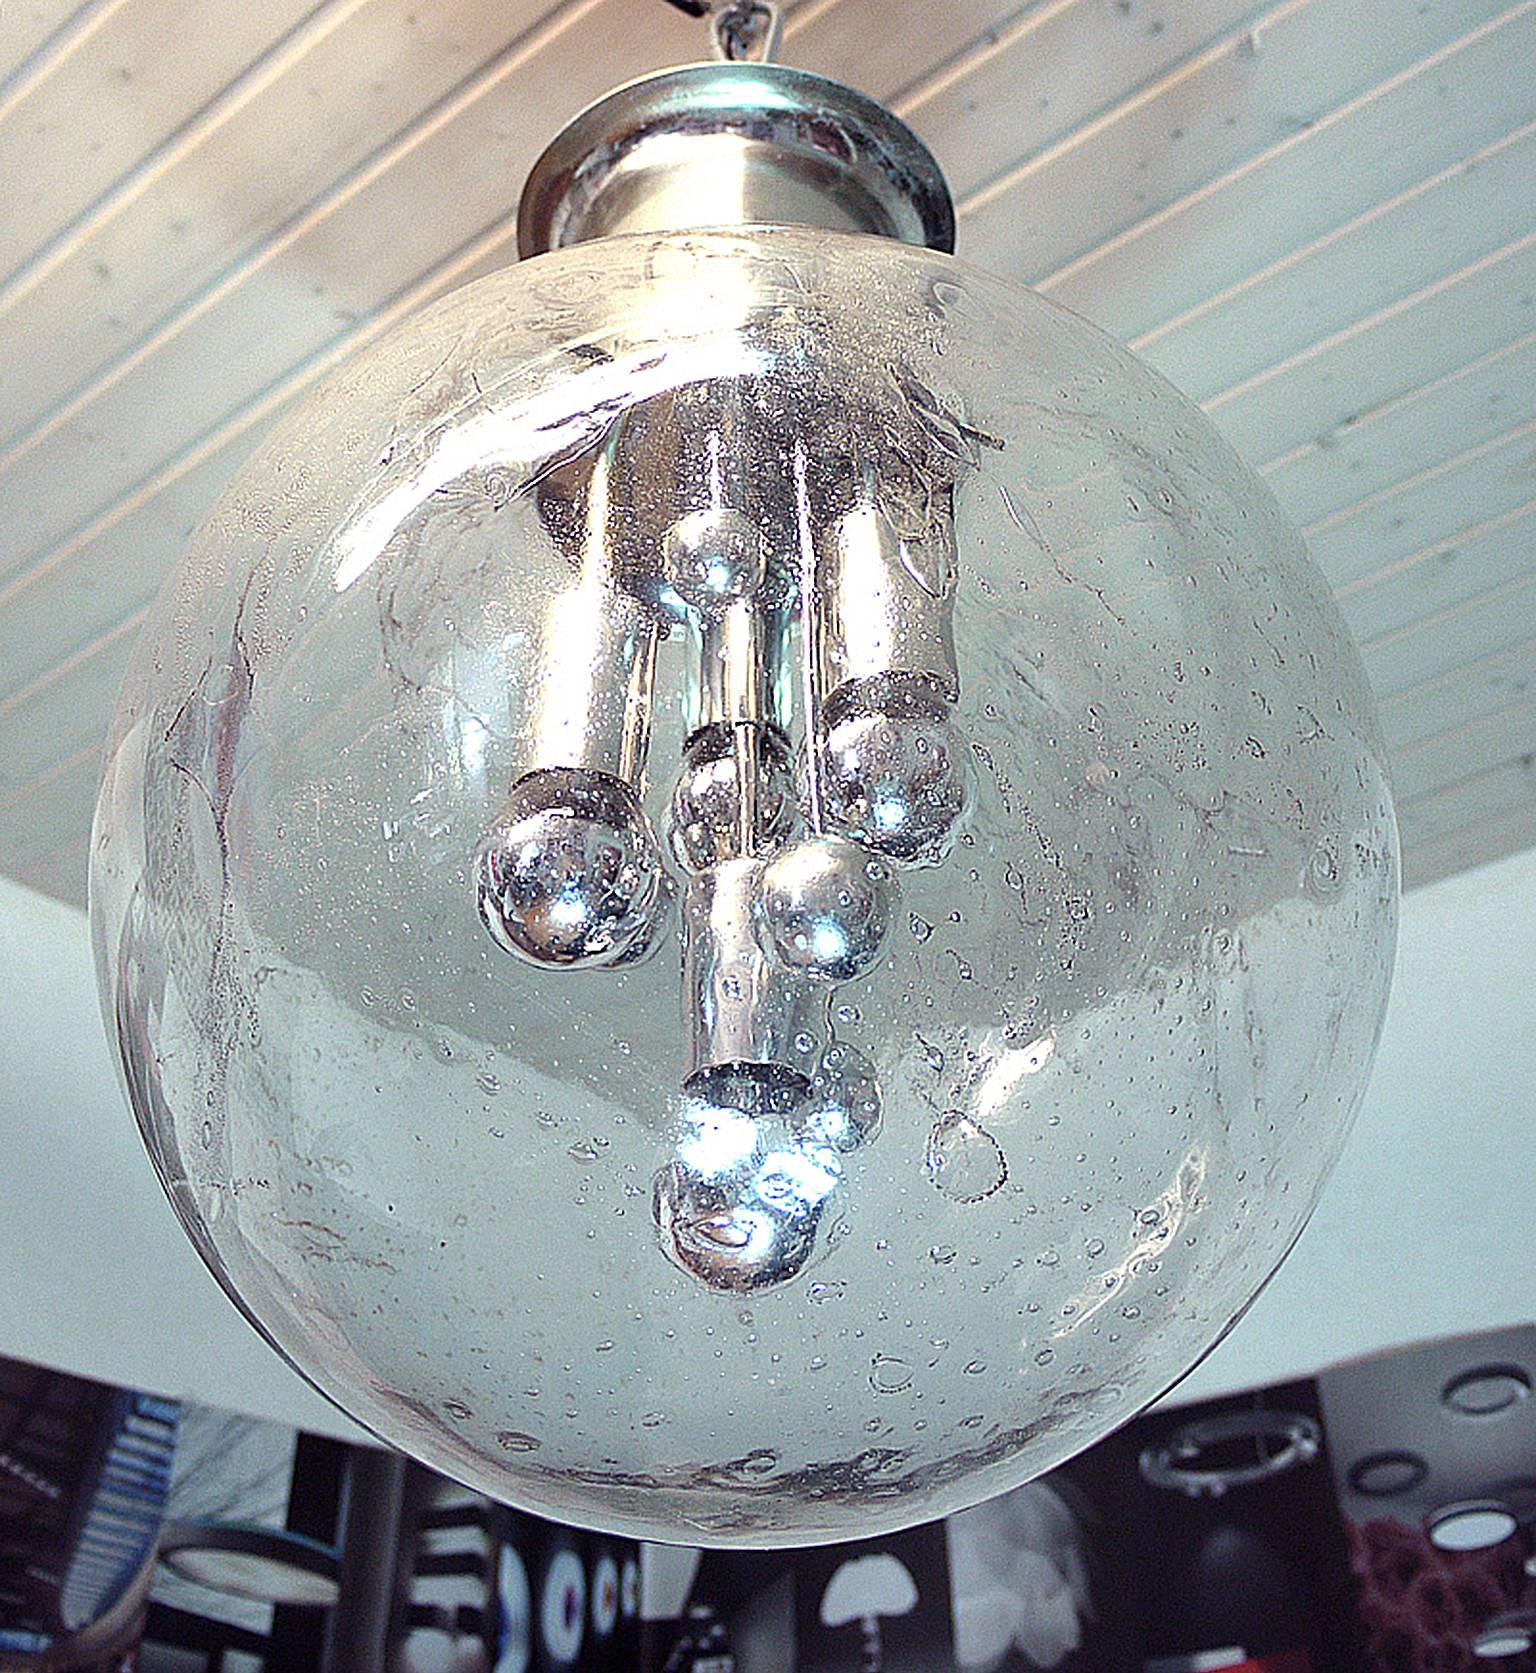 Amazing high quality Sputnik flush mount ceiling light 'Big Ball' with a heavy, lava-like hand blown bubble glass ball on a chromed base. Inside the lamp there are chrome spheres of different sizes, reminiscent of planet. Heavy design. A real design